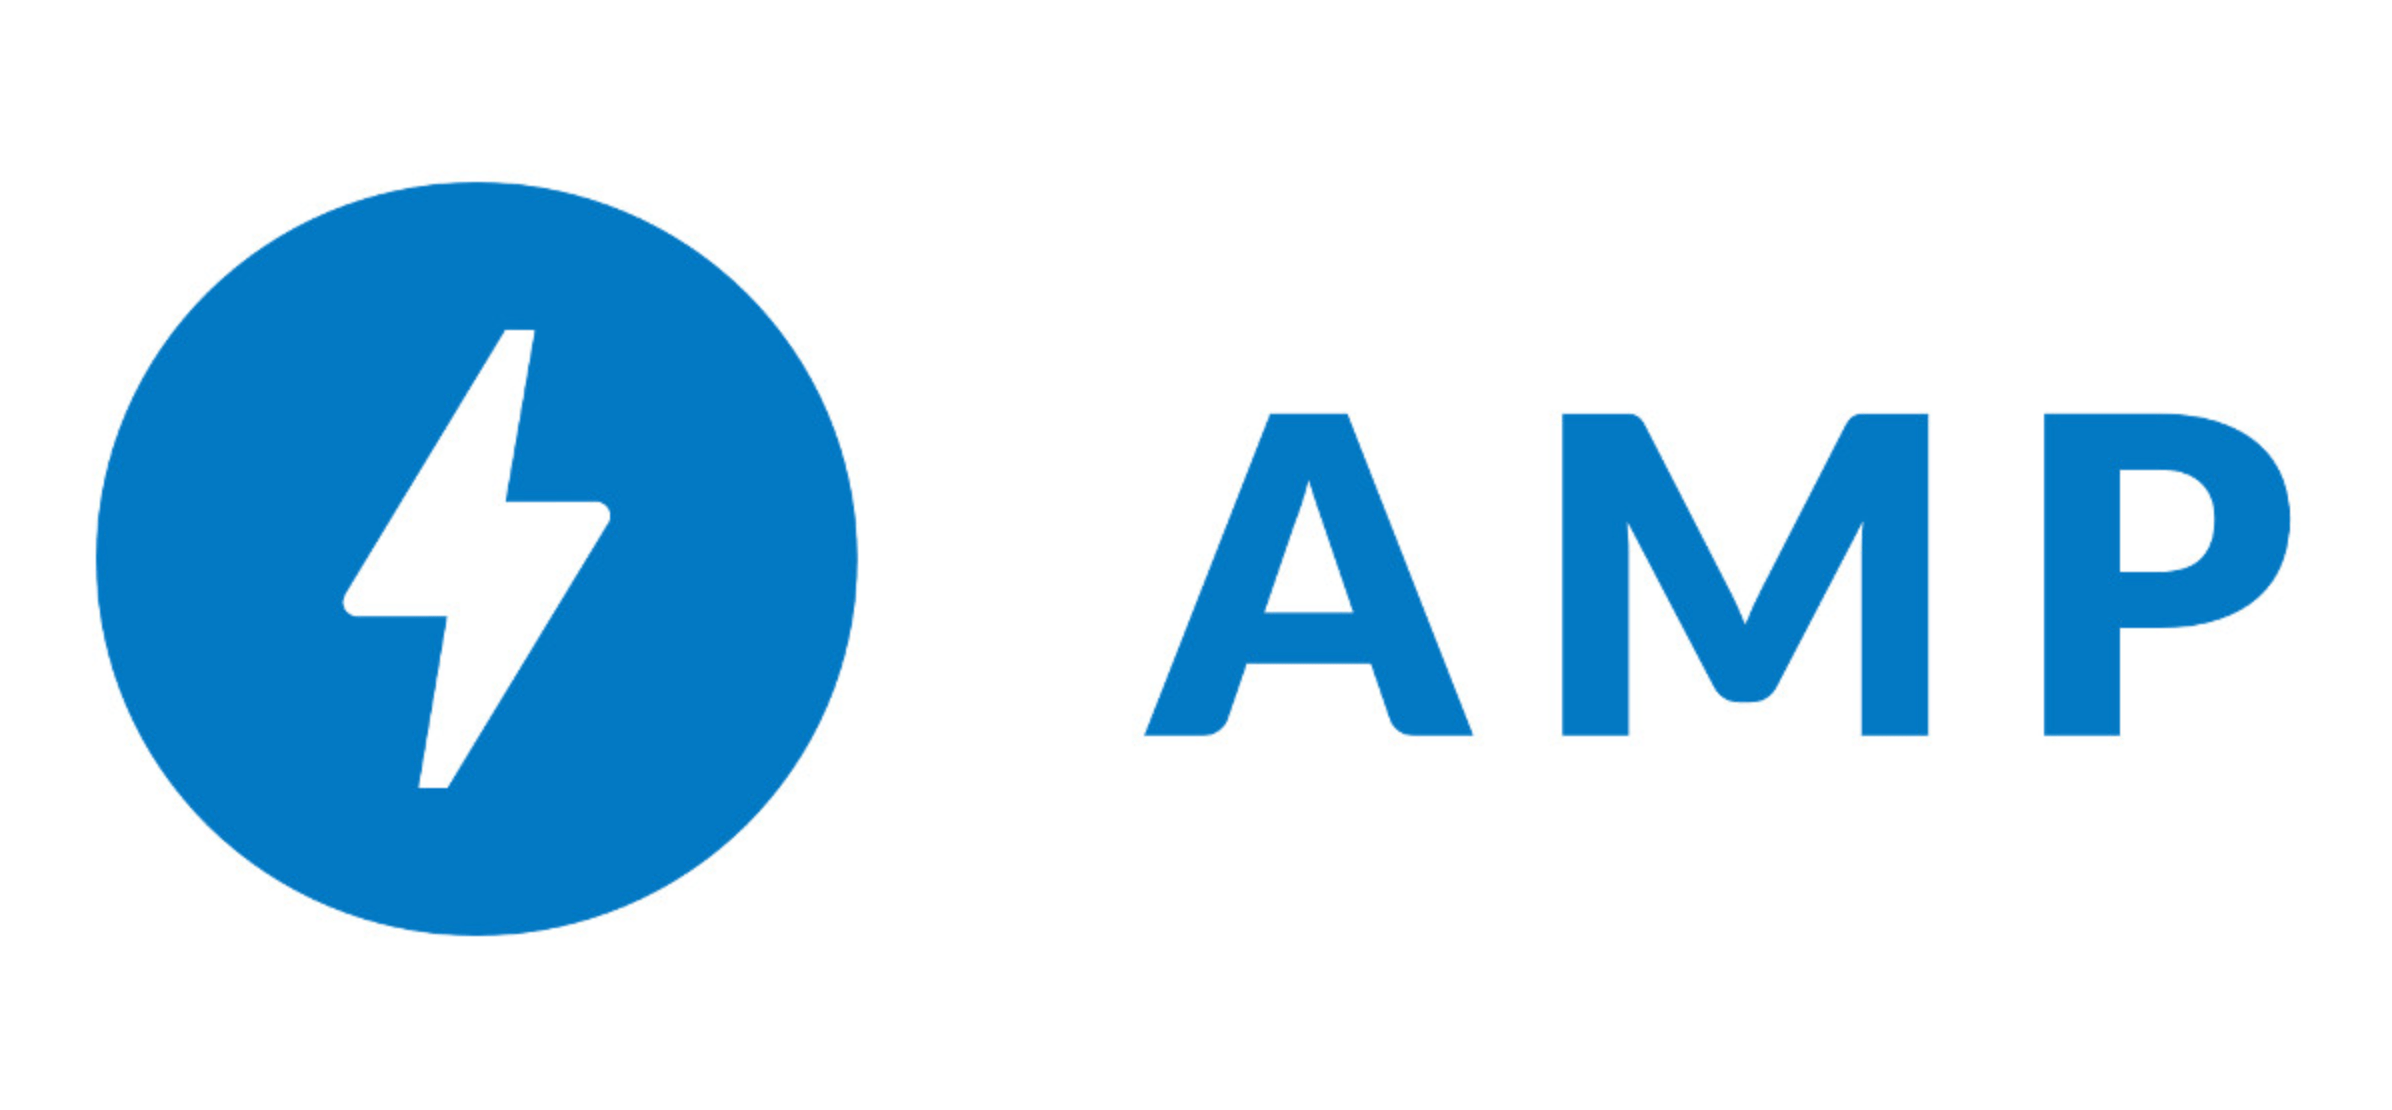 Jeremy Keith Resigns from AMP Advisory Committee: “It Has Become Clear to Me that AMP Remains a Google Product”